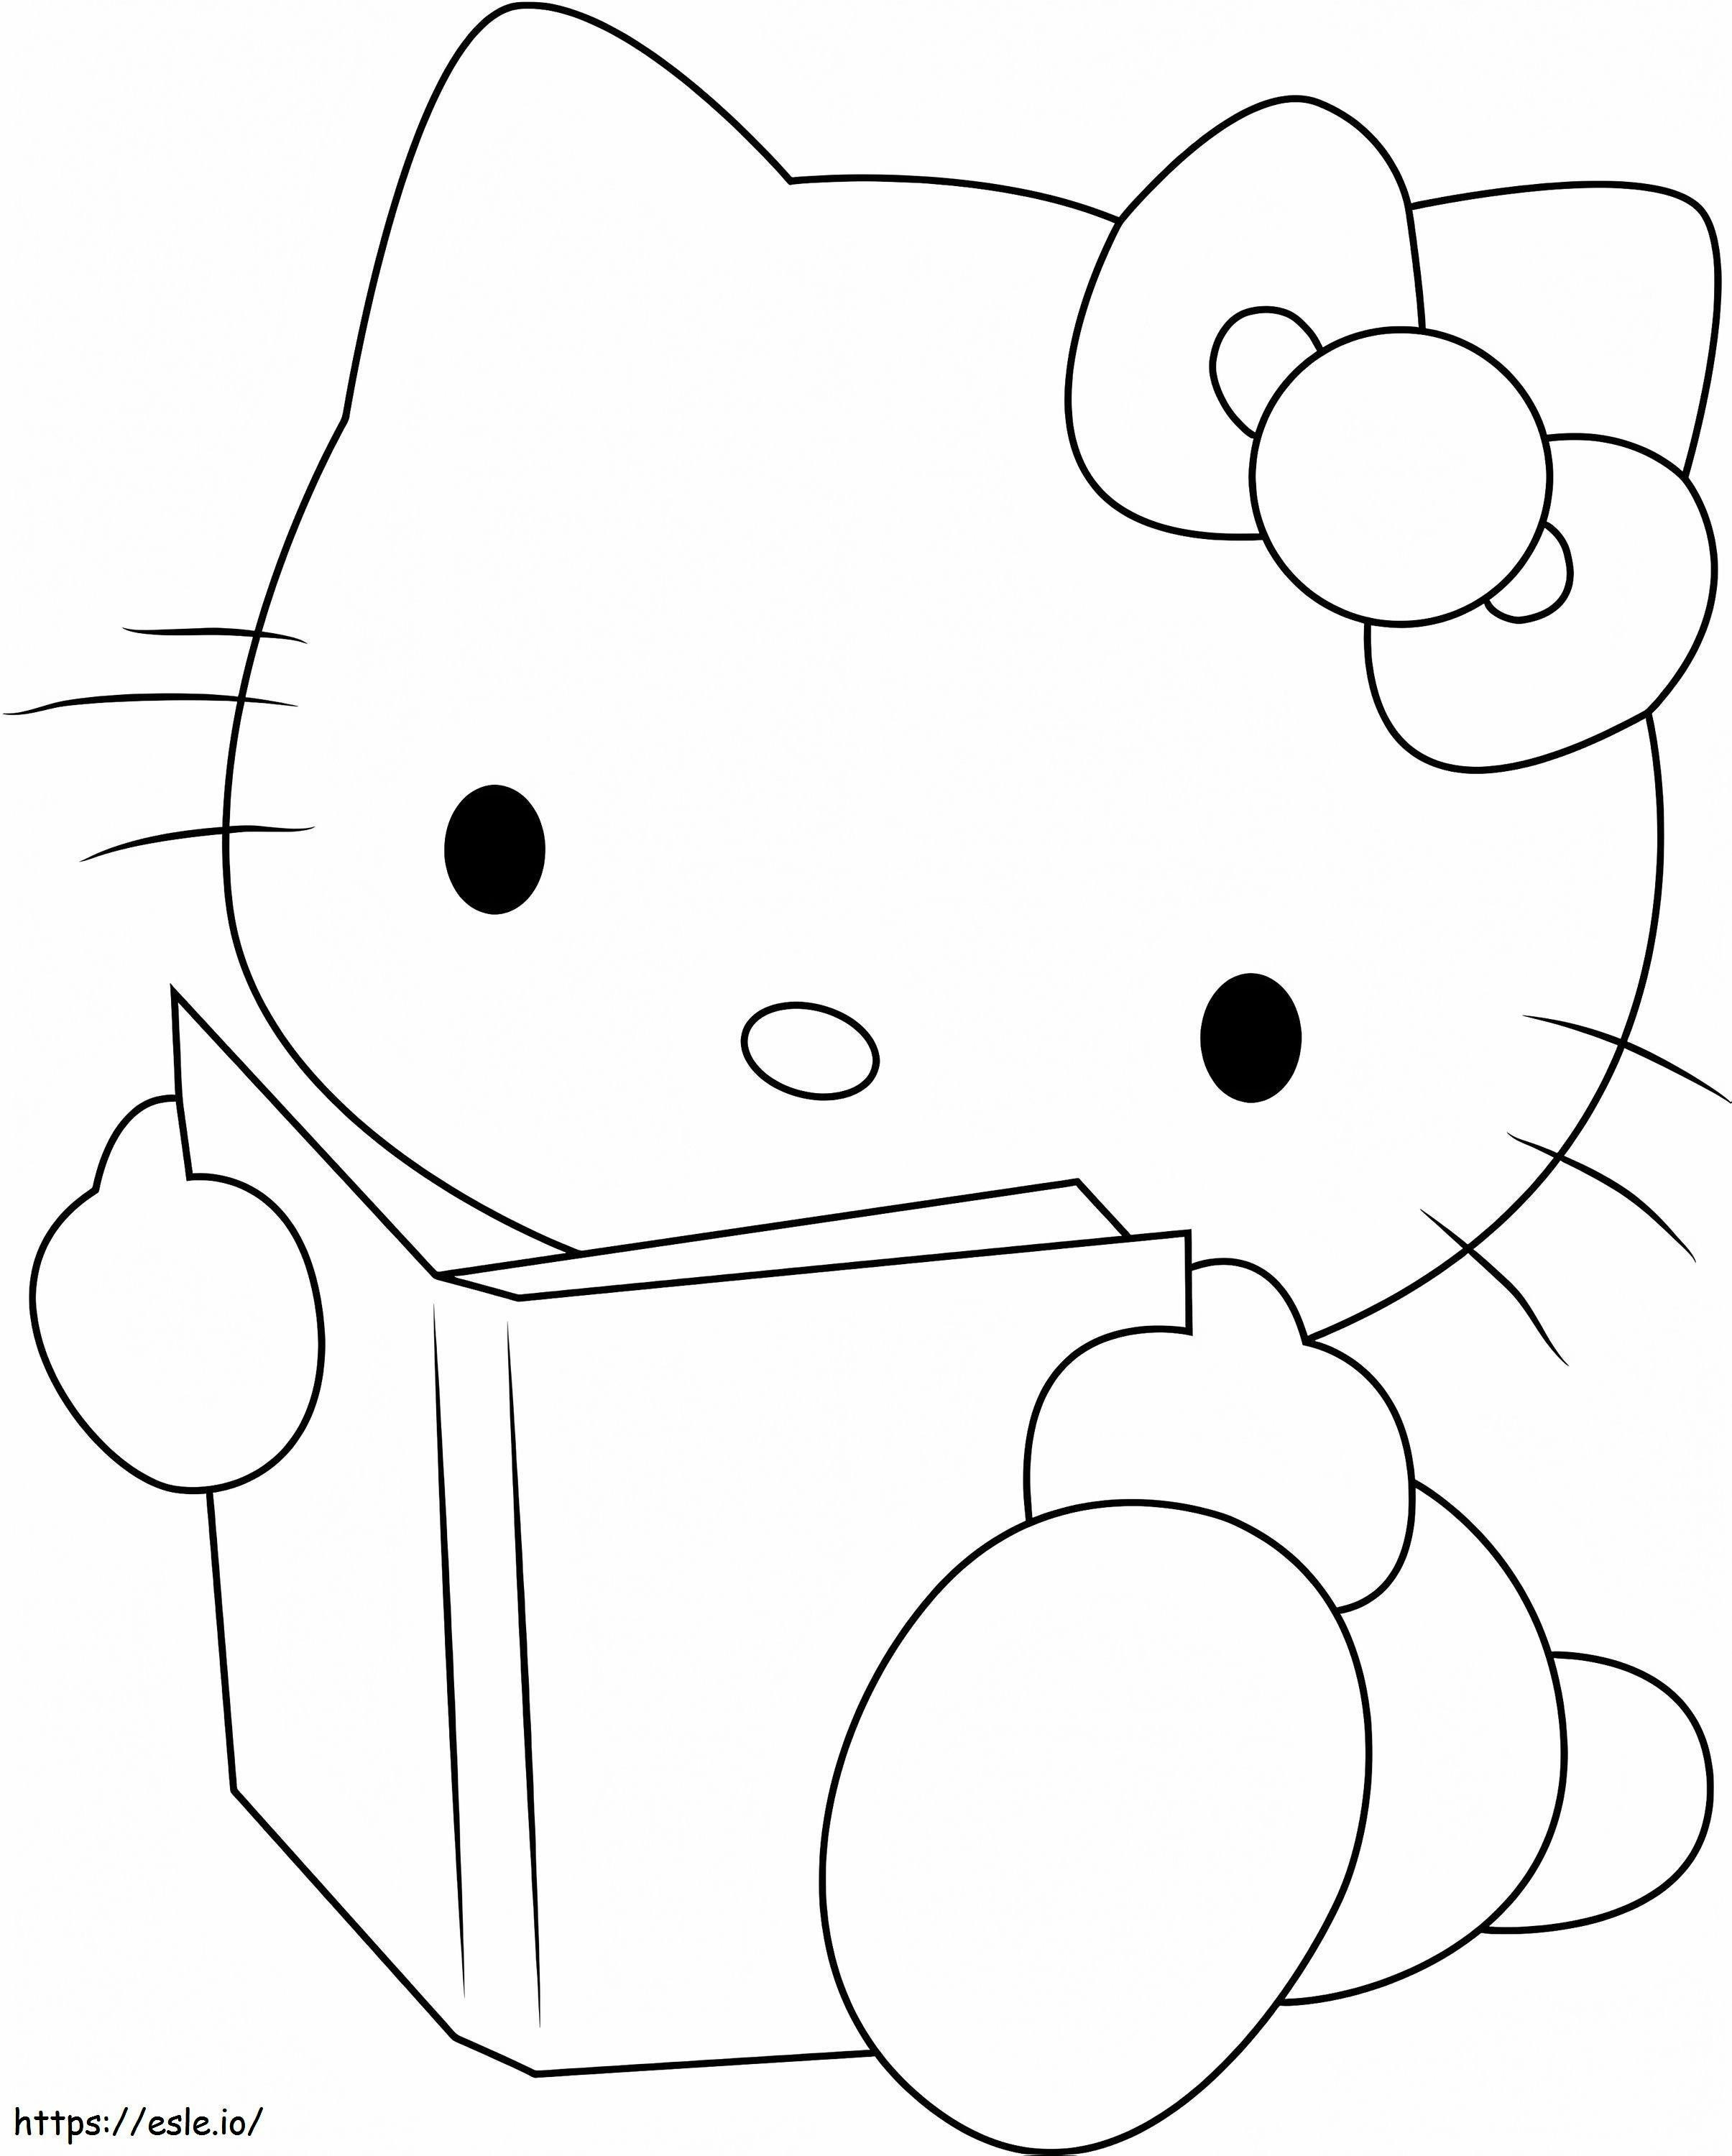 1530064925 50 coloring page